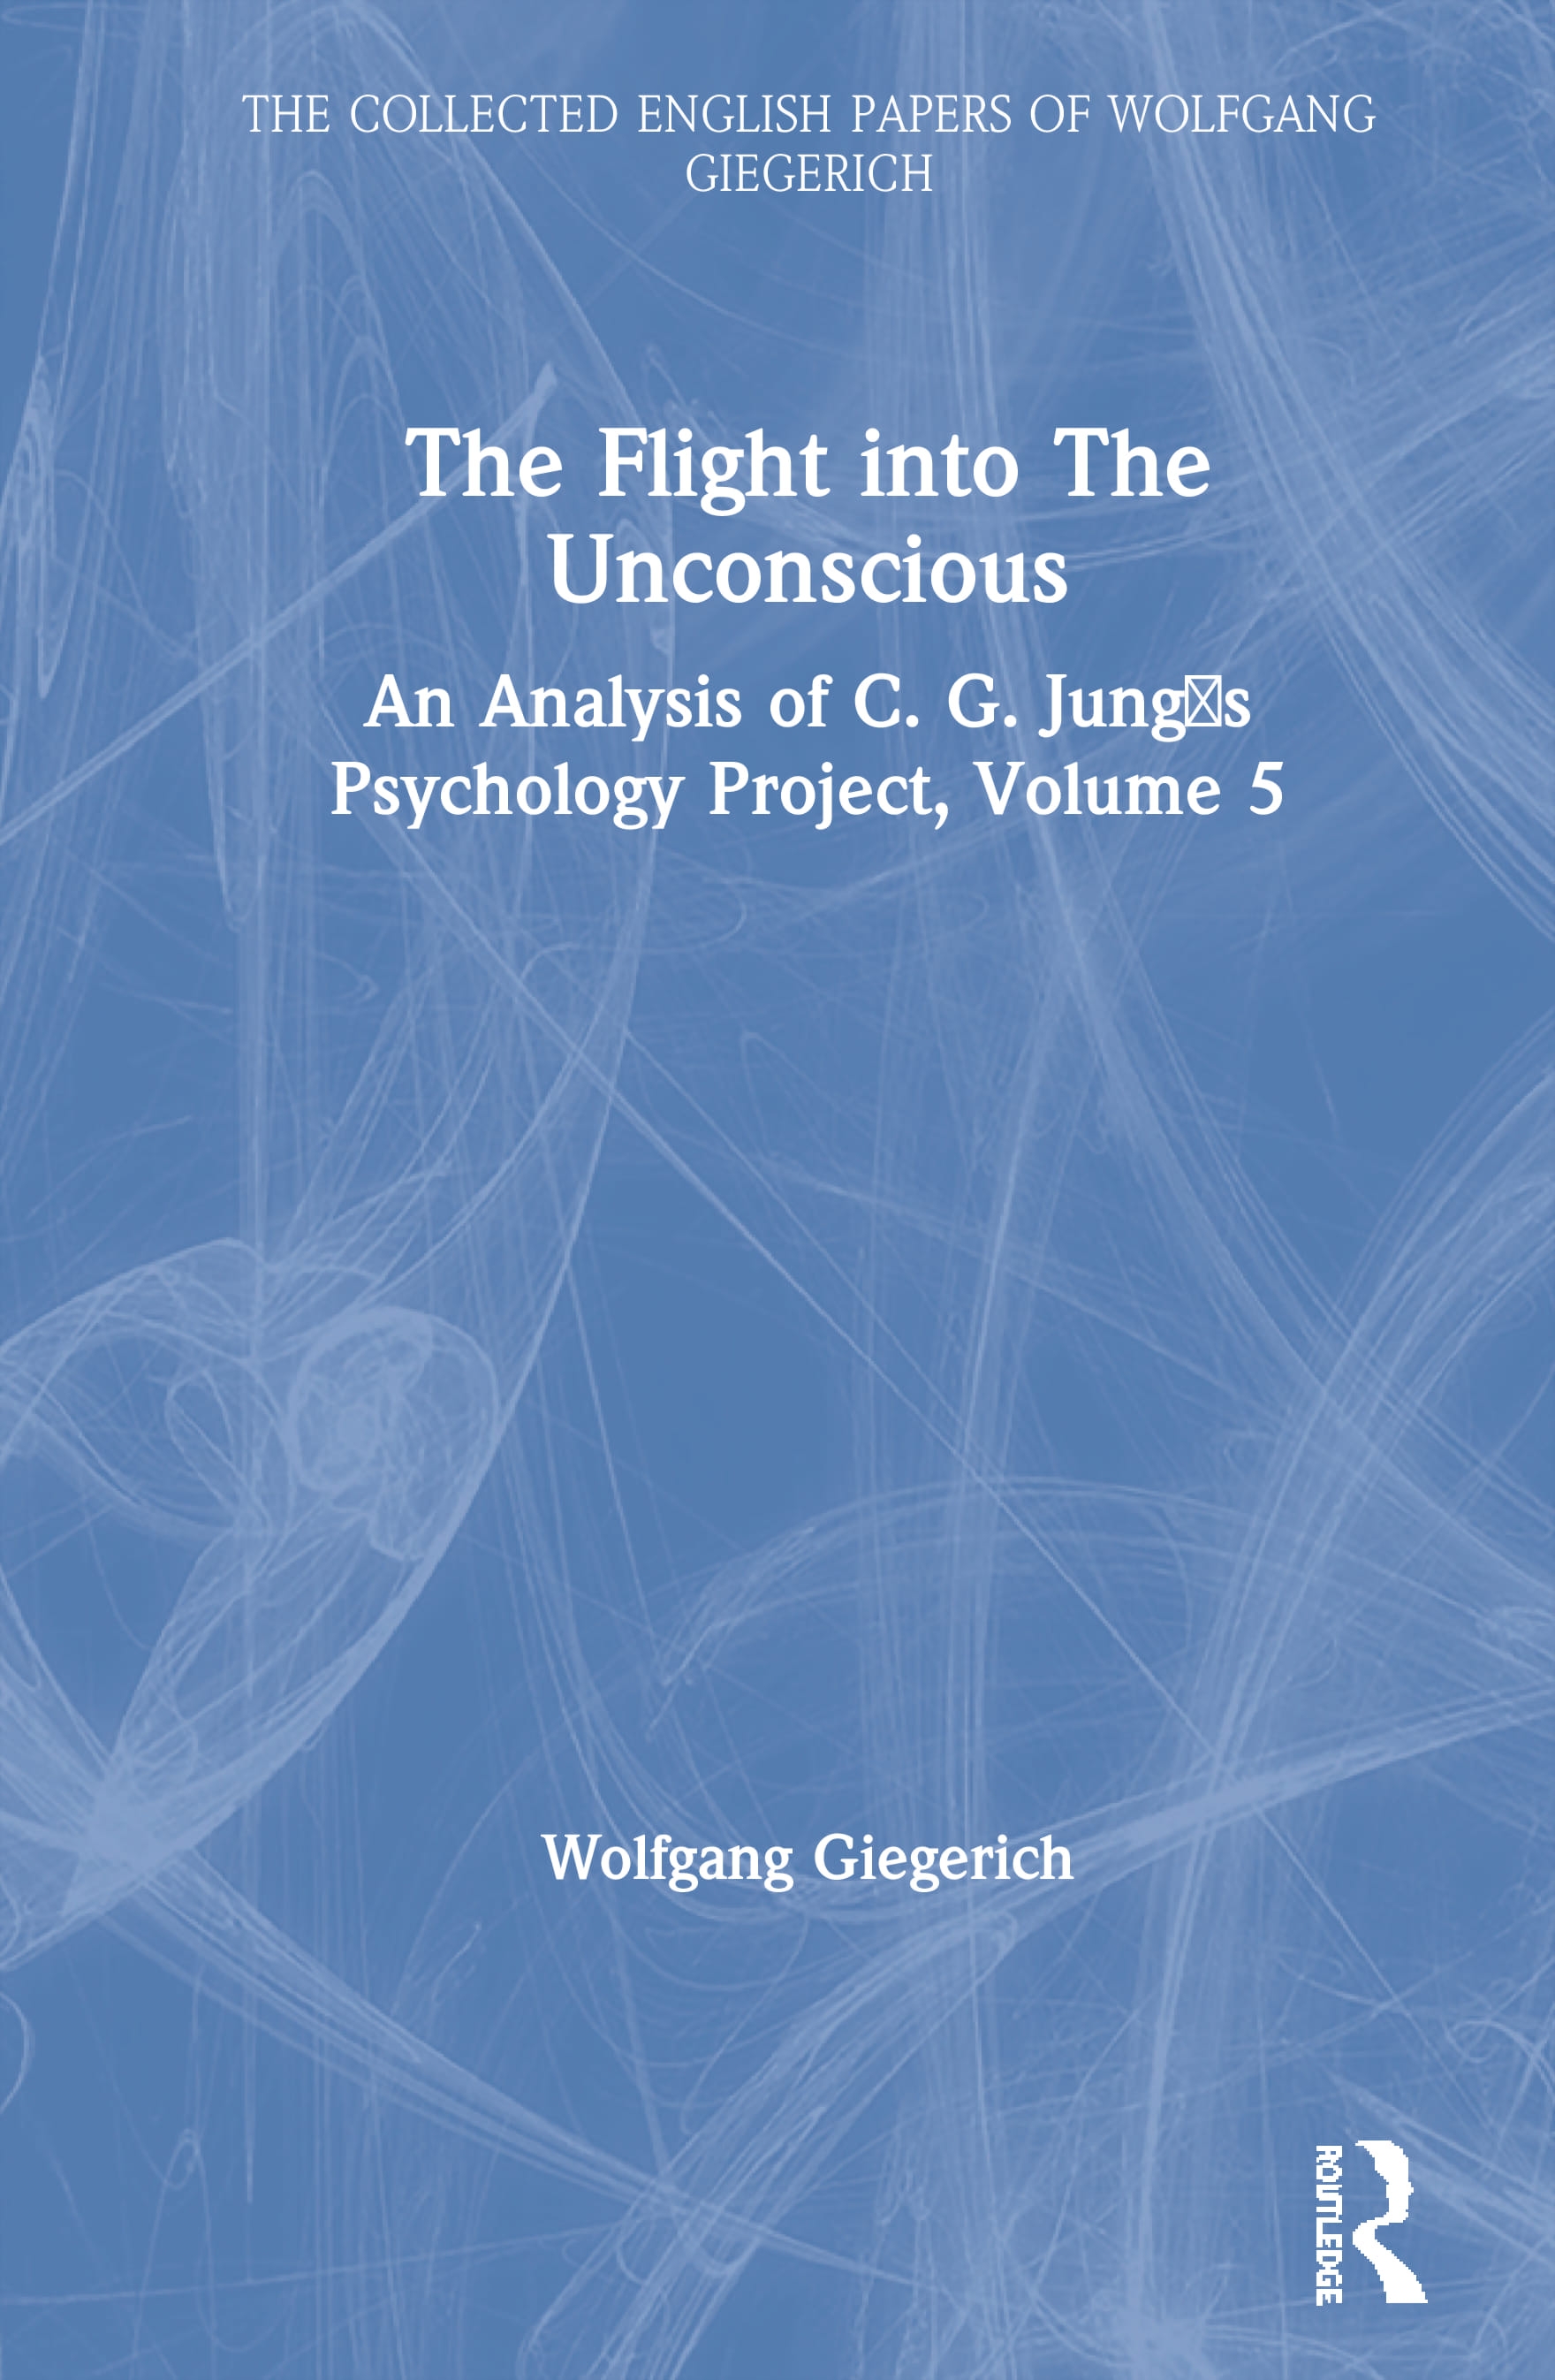 The Flight Into the Unconscious: An Analysis of C. G. Jungʼs Psychology Project, Volume 5